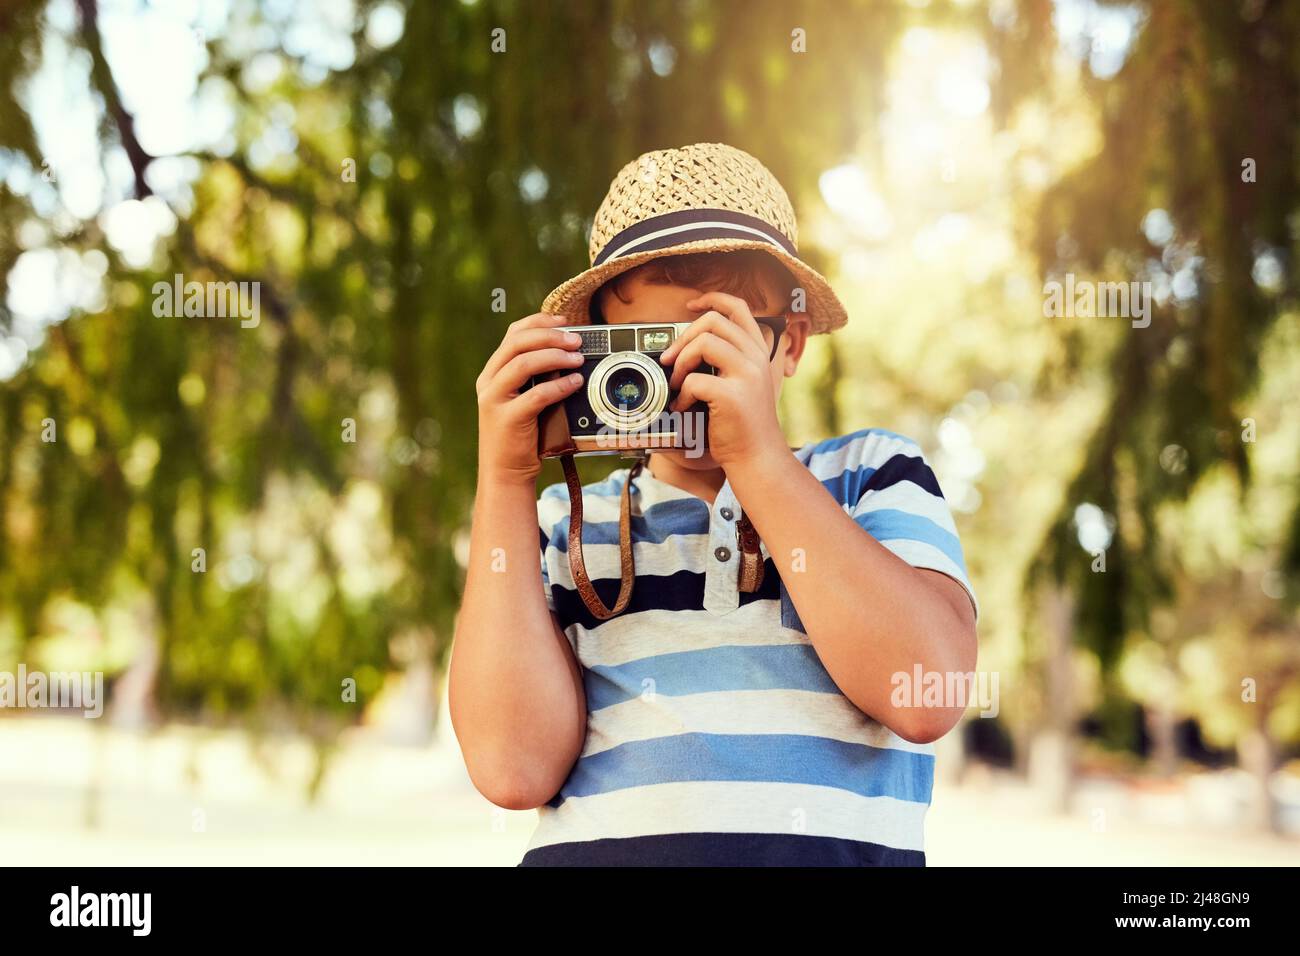 Seeing the world in a new light. Shot of a little boy taking a photo with a vintage camera at the park. Stock Photo